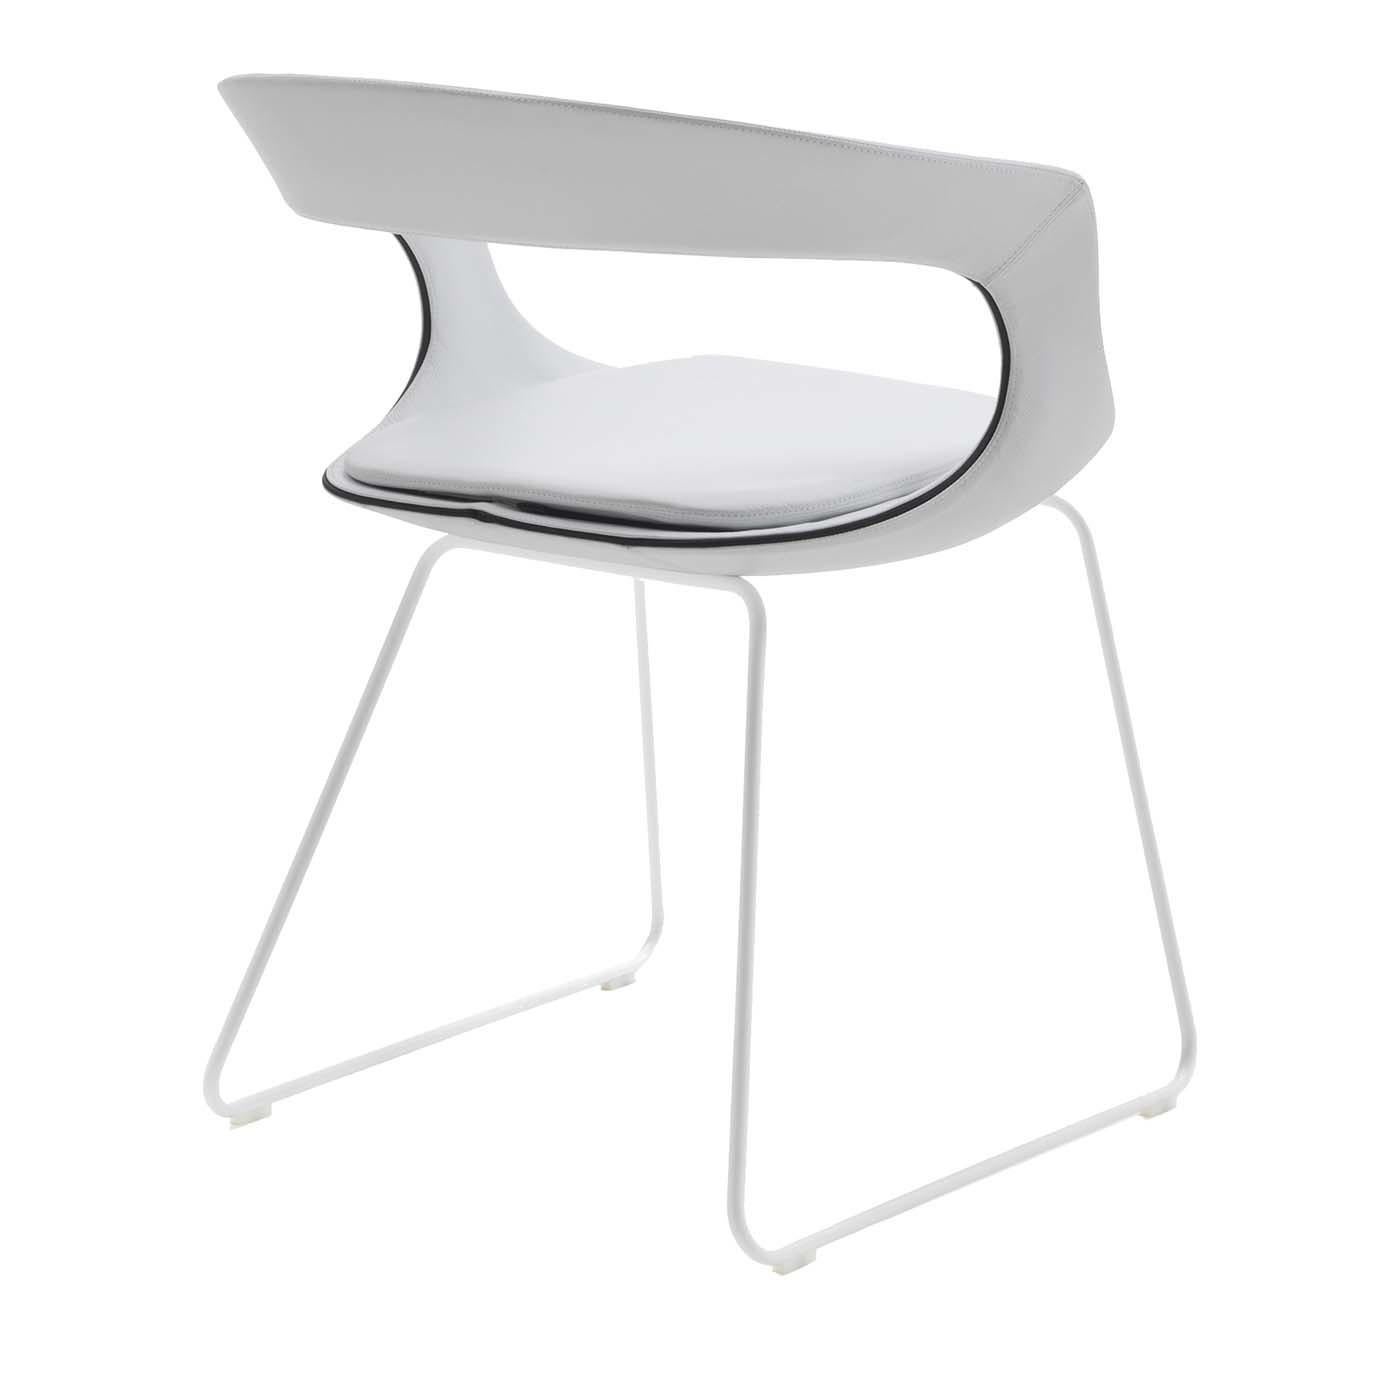 Modern Frenchkiss Low-Backed Sled-Base Chair by Stefano Bigi For Sale